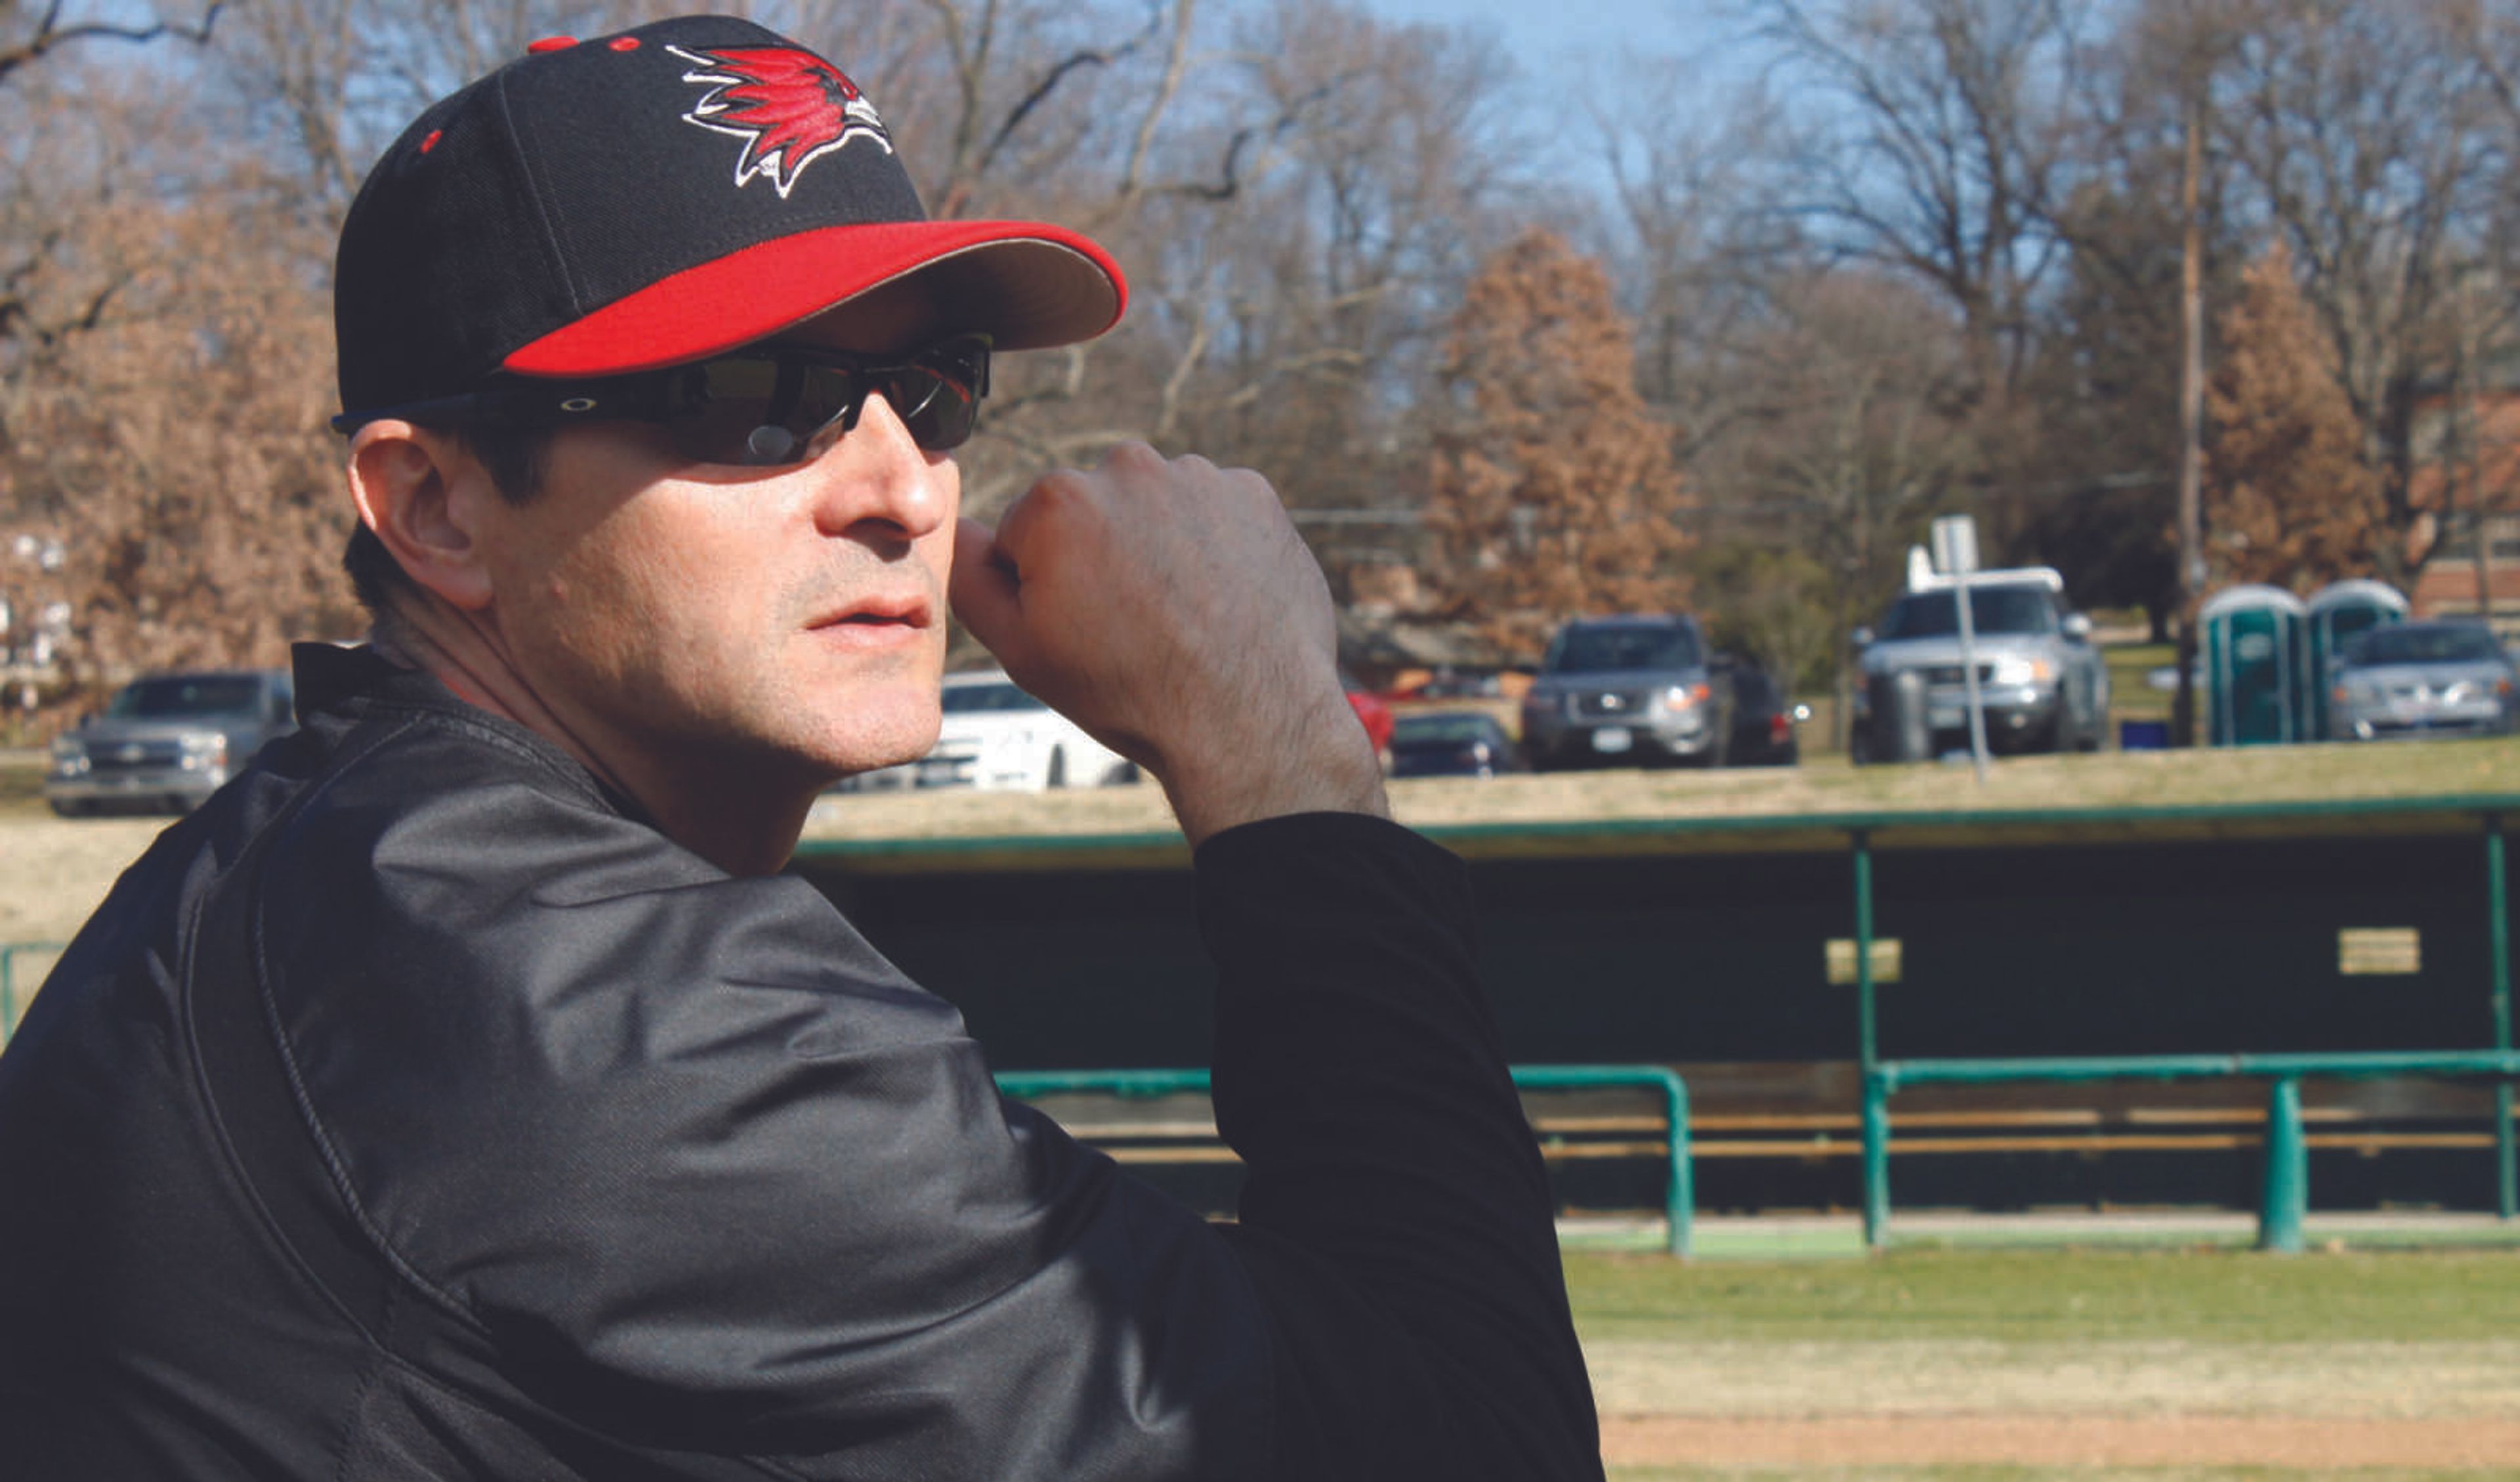 Southeast baseball coach expects athleticism, versatility to create offense